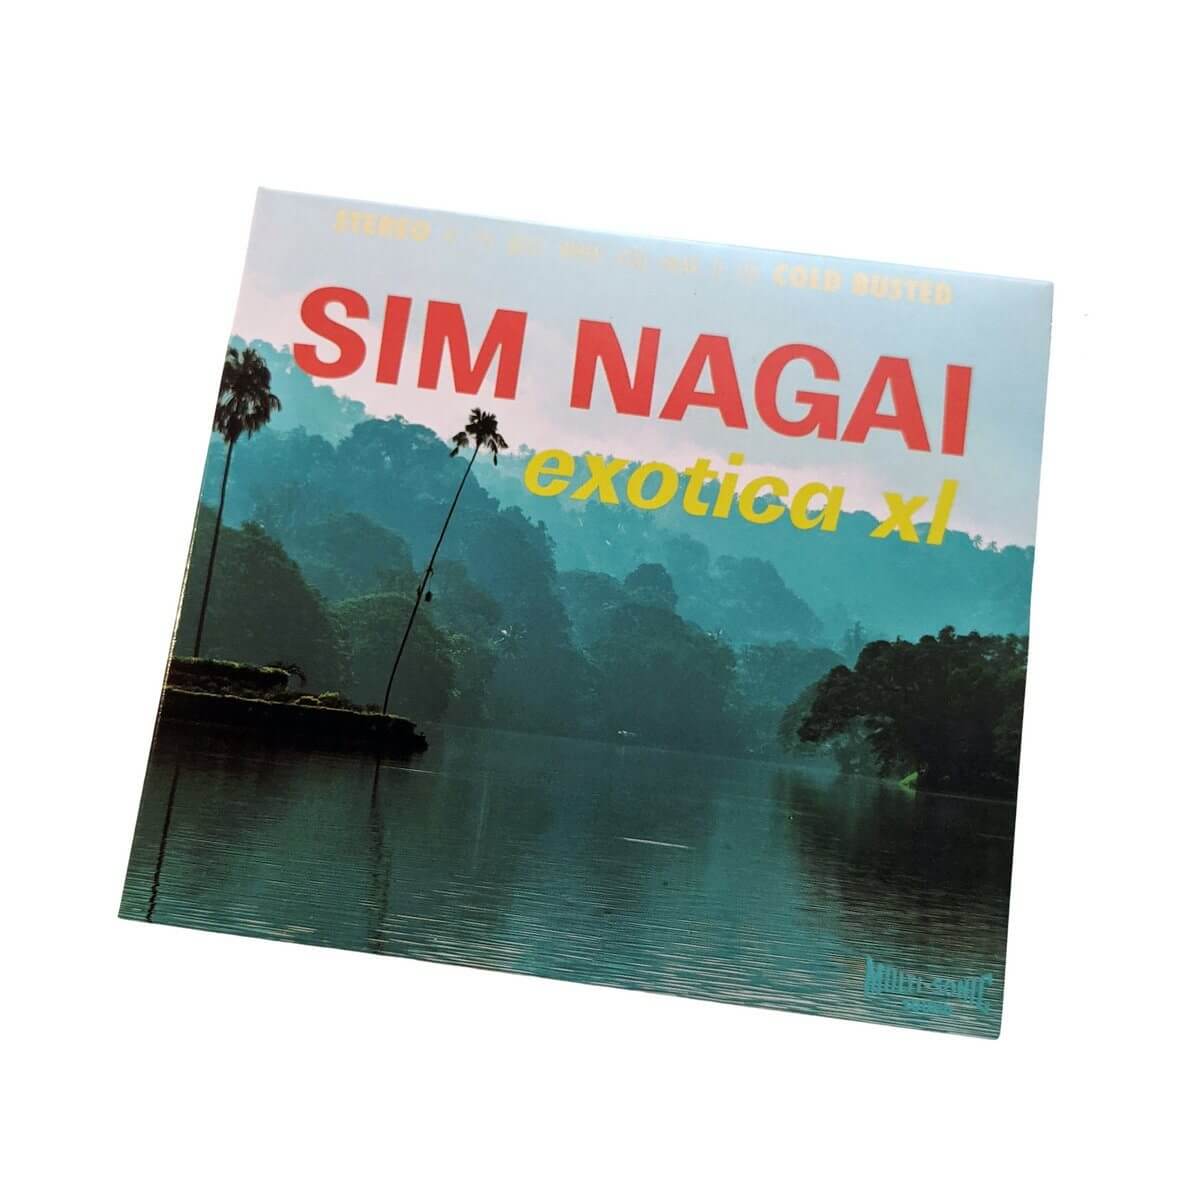 Sim Nagai - Exotica XL - Limited Edition Compact Disc - Cold Busted